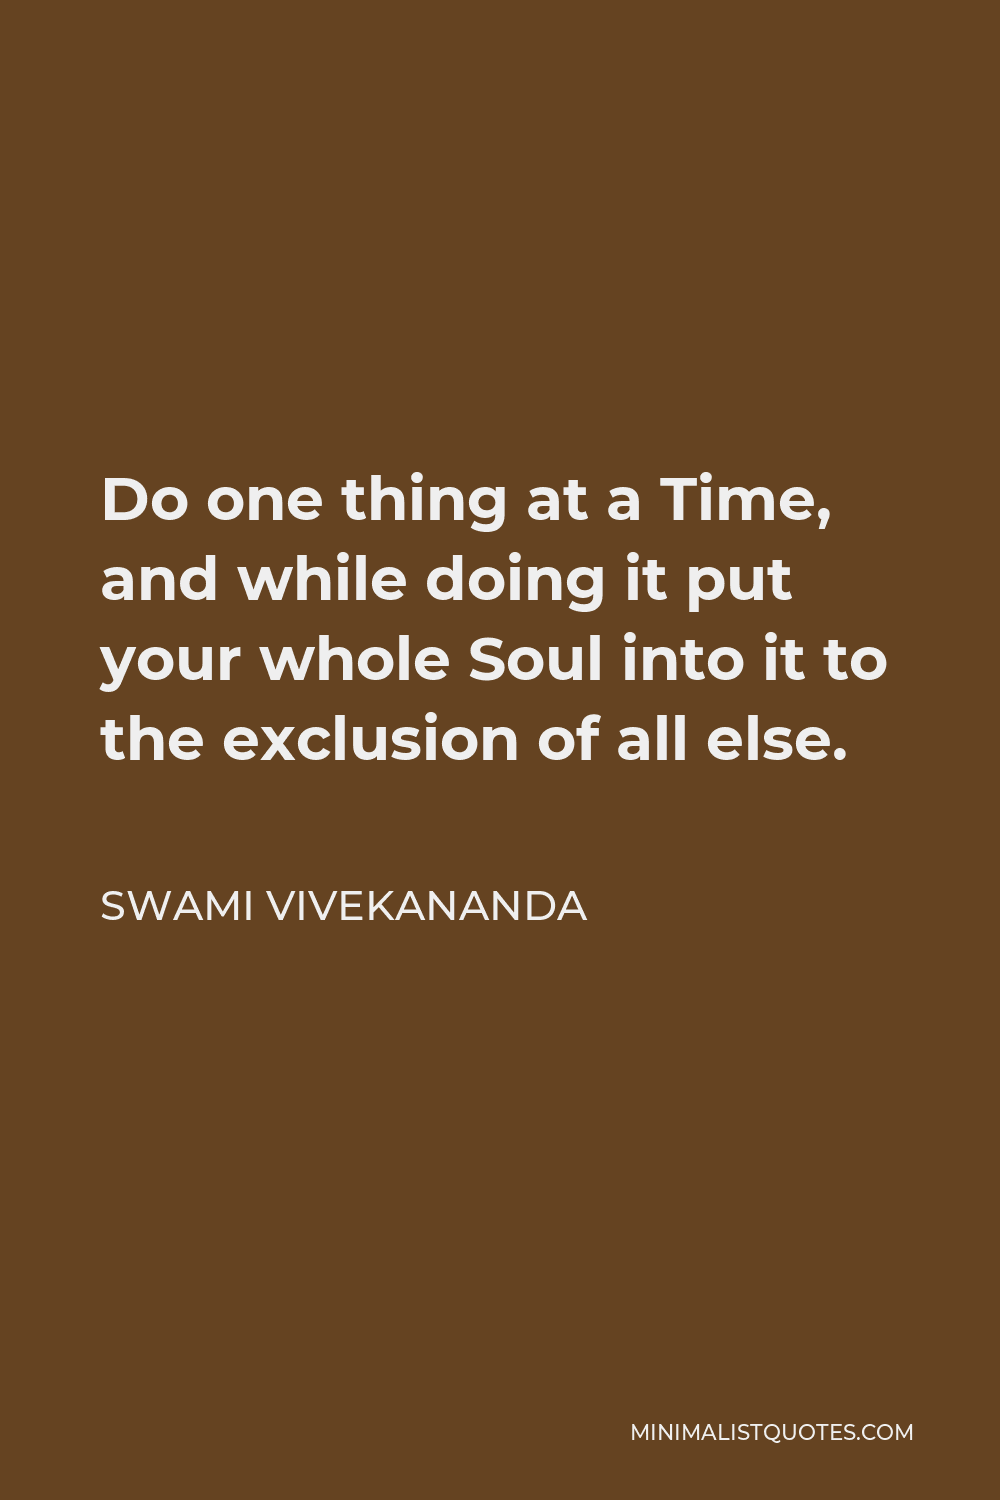 Swami Vivekananda Quote - Do one thing at a Time, and while doing it put your whole Soul into it to the exclusion of all else.